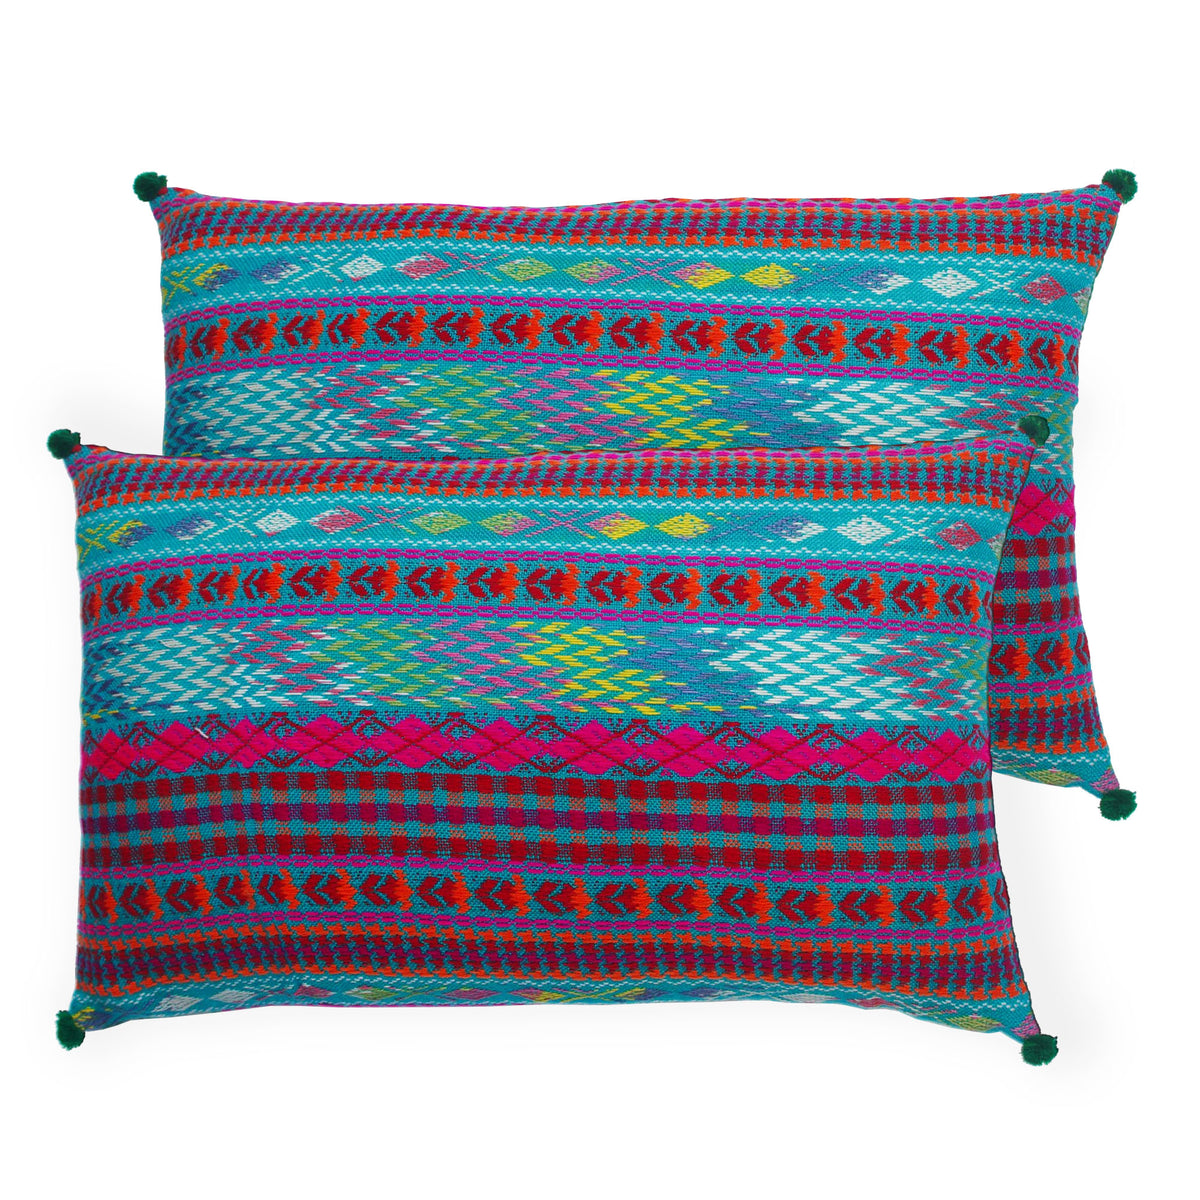 Pack of 2 Oblong Handloom Cotton Pillow Covers - Multicolour